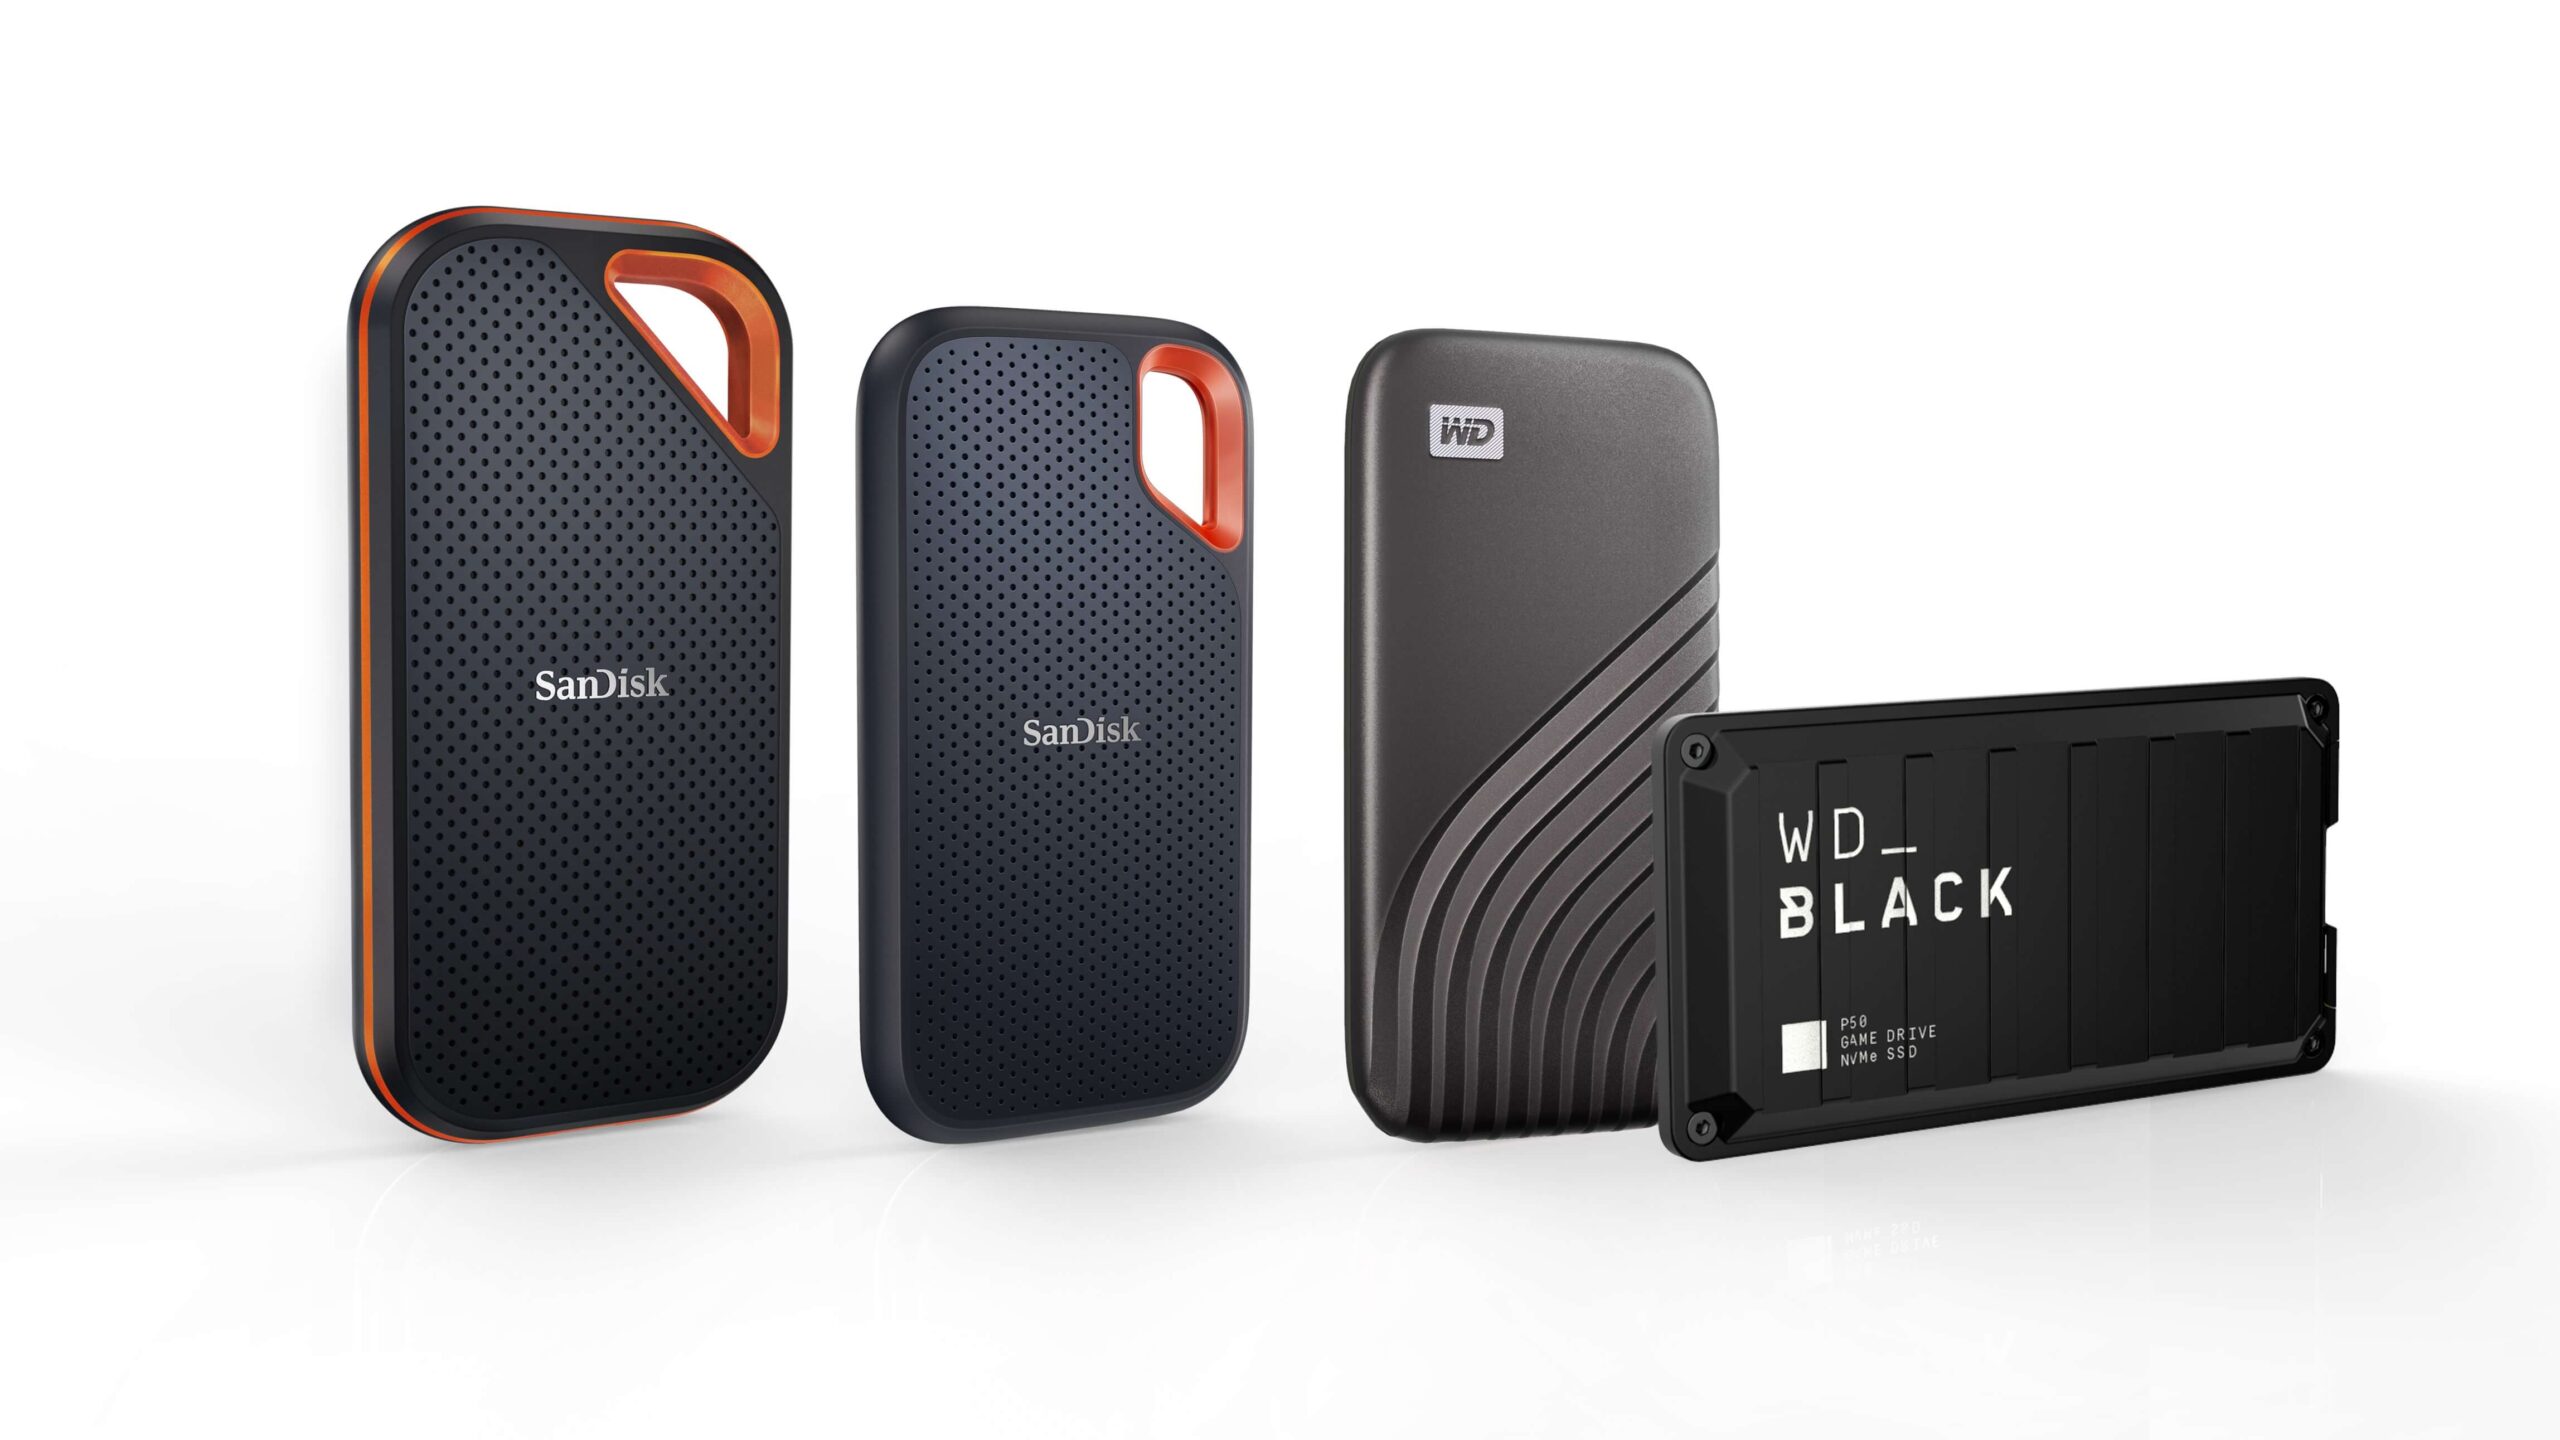 Western Digital bumps up portable drives to 4TB